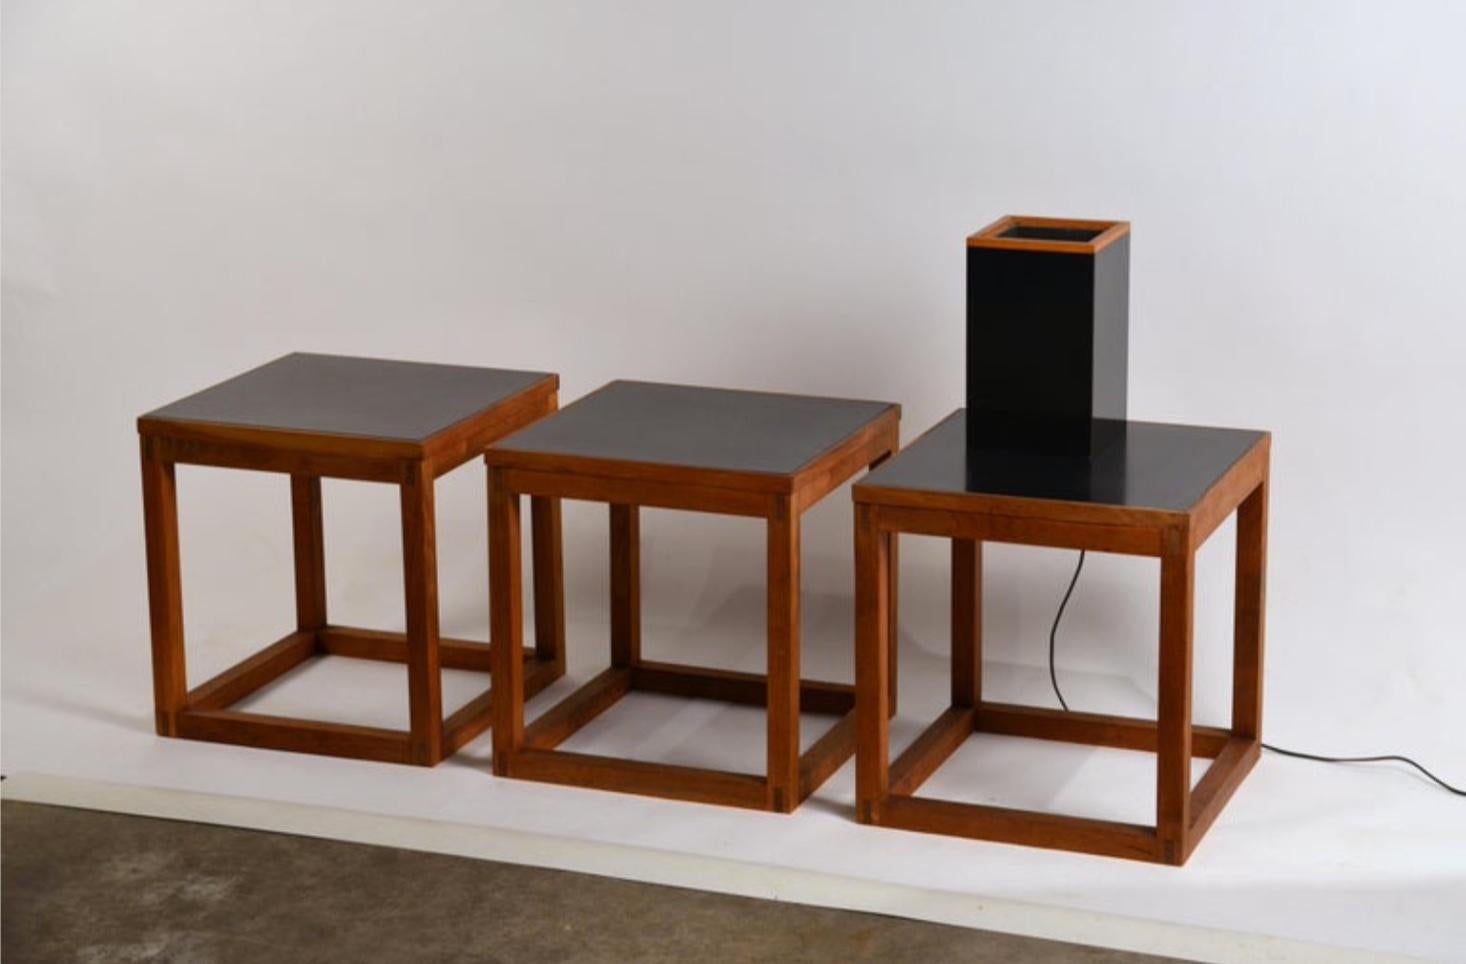 Set of 3 minimal teak and black laminate cube side or end tables. Matching lamp included.

Dimensions listed are for each table.

The lamp is 6 in. wide x 6 in. deep x 10 in. tall.

Versatile minimal design. Can also be used as a 3-part coffee table.